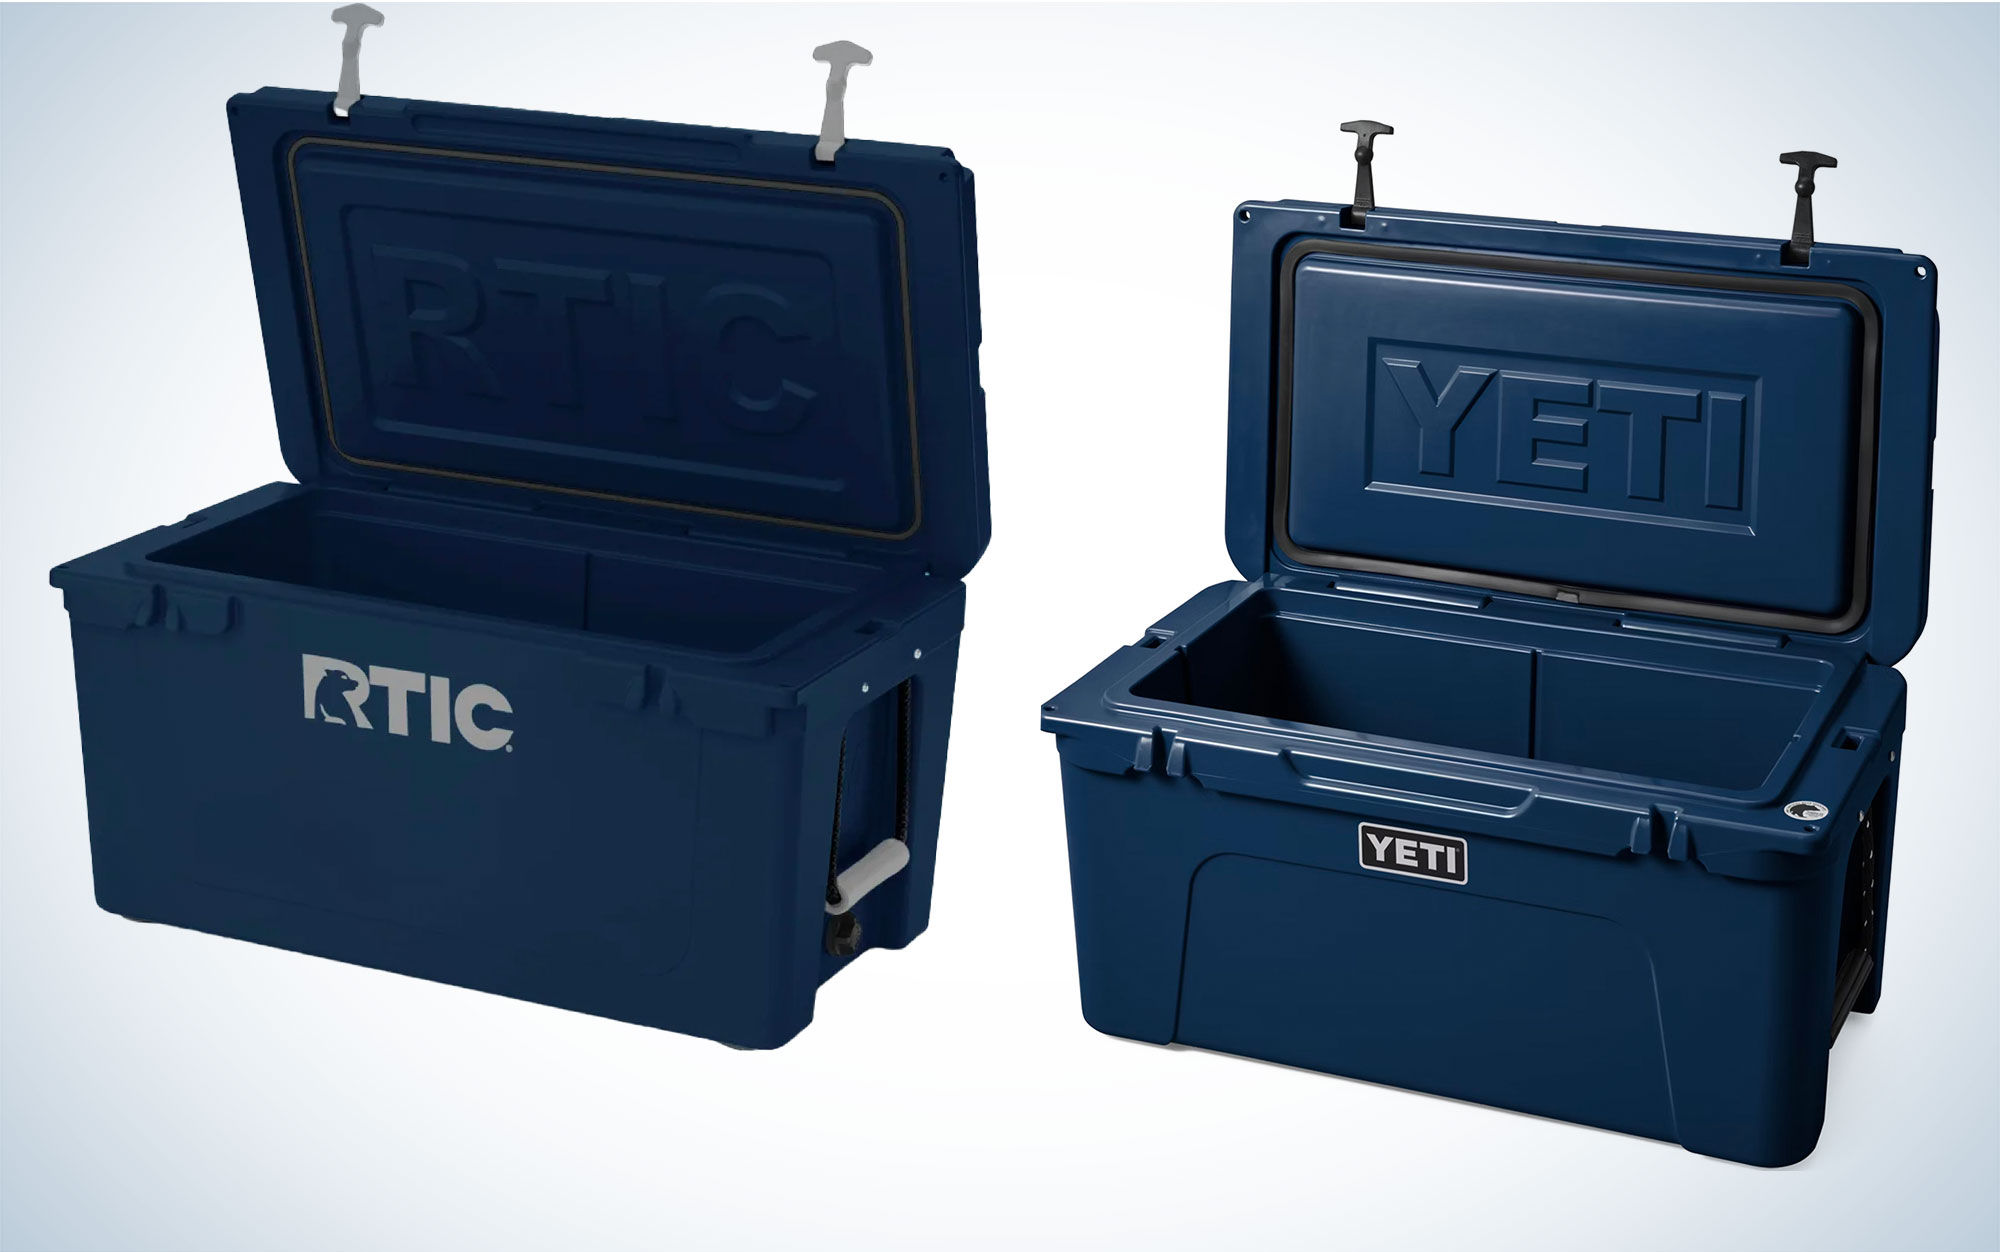 Why Yeti's New Cooler Is Worth the Money